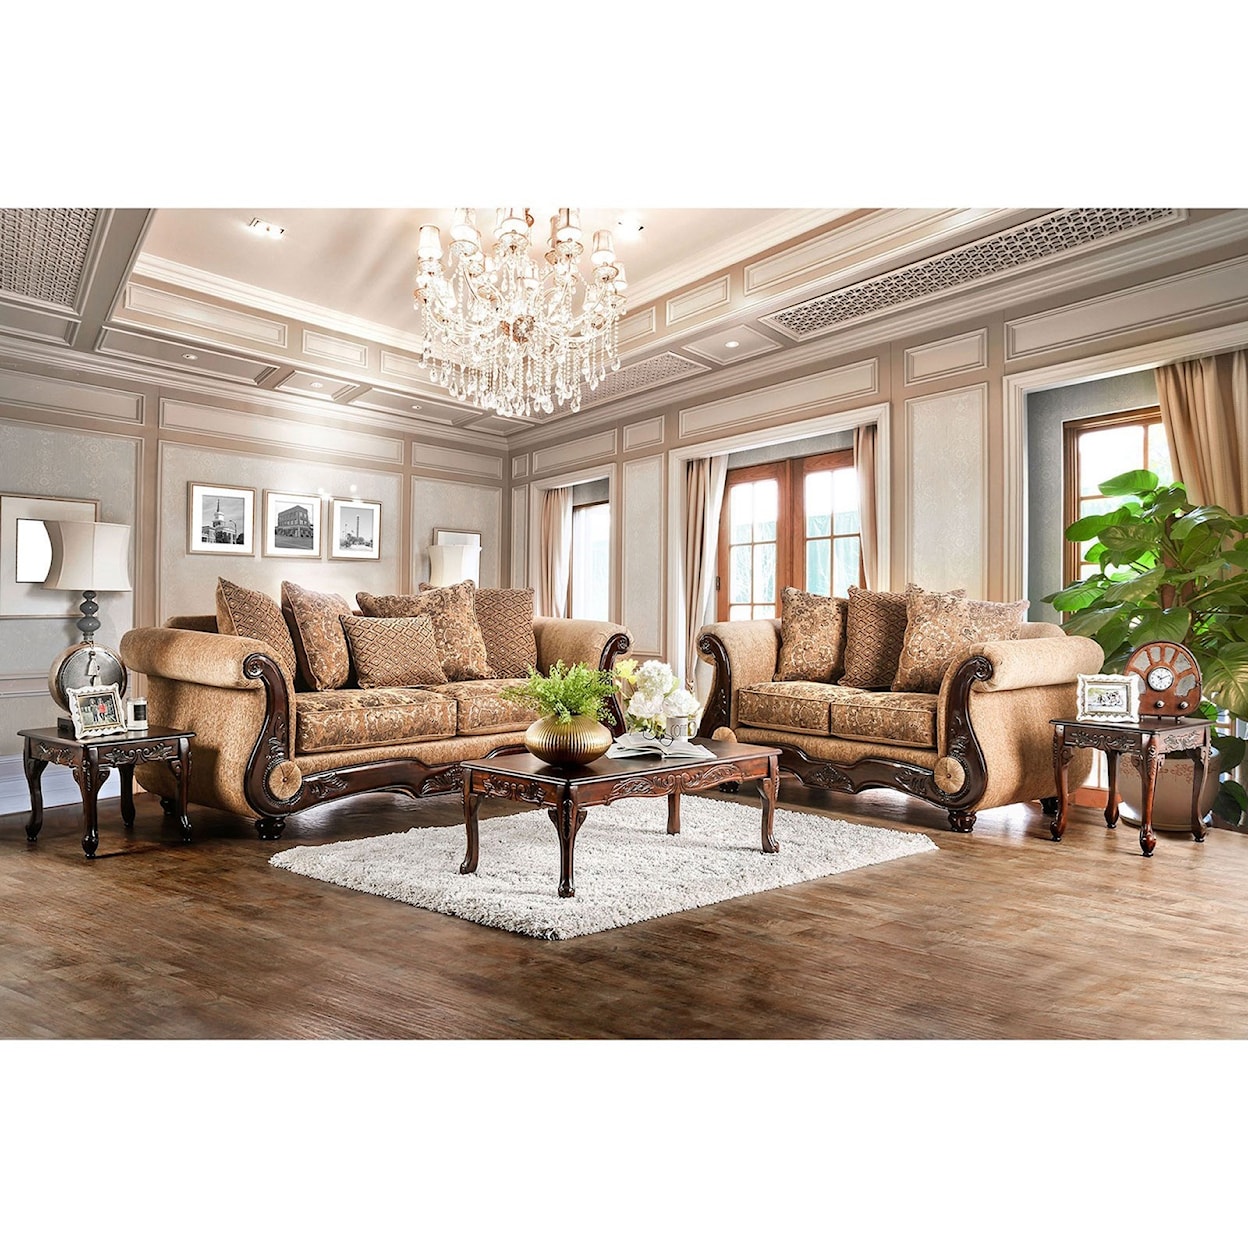 Furniture of America Nicanor SM6407-SF Traditional Sofa with Rolled ...